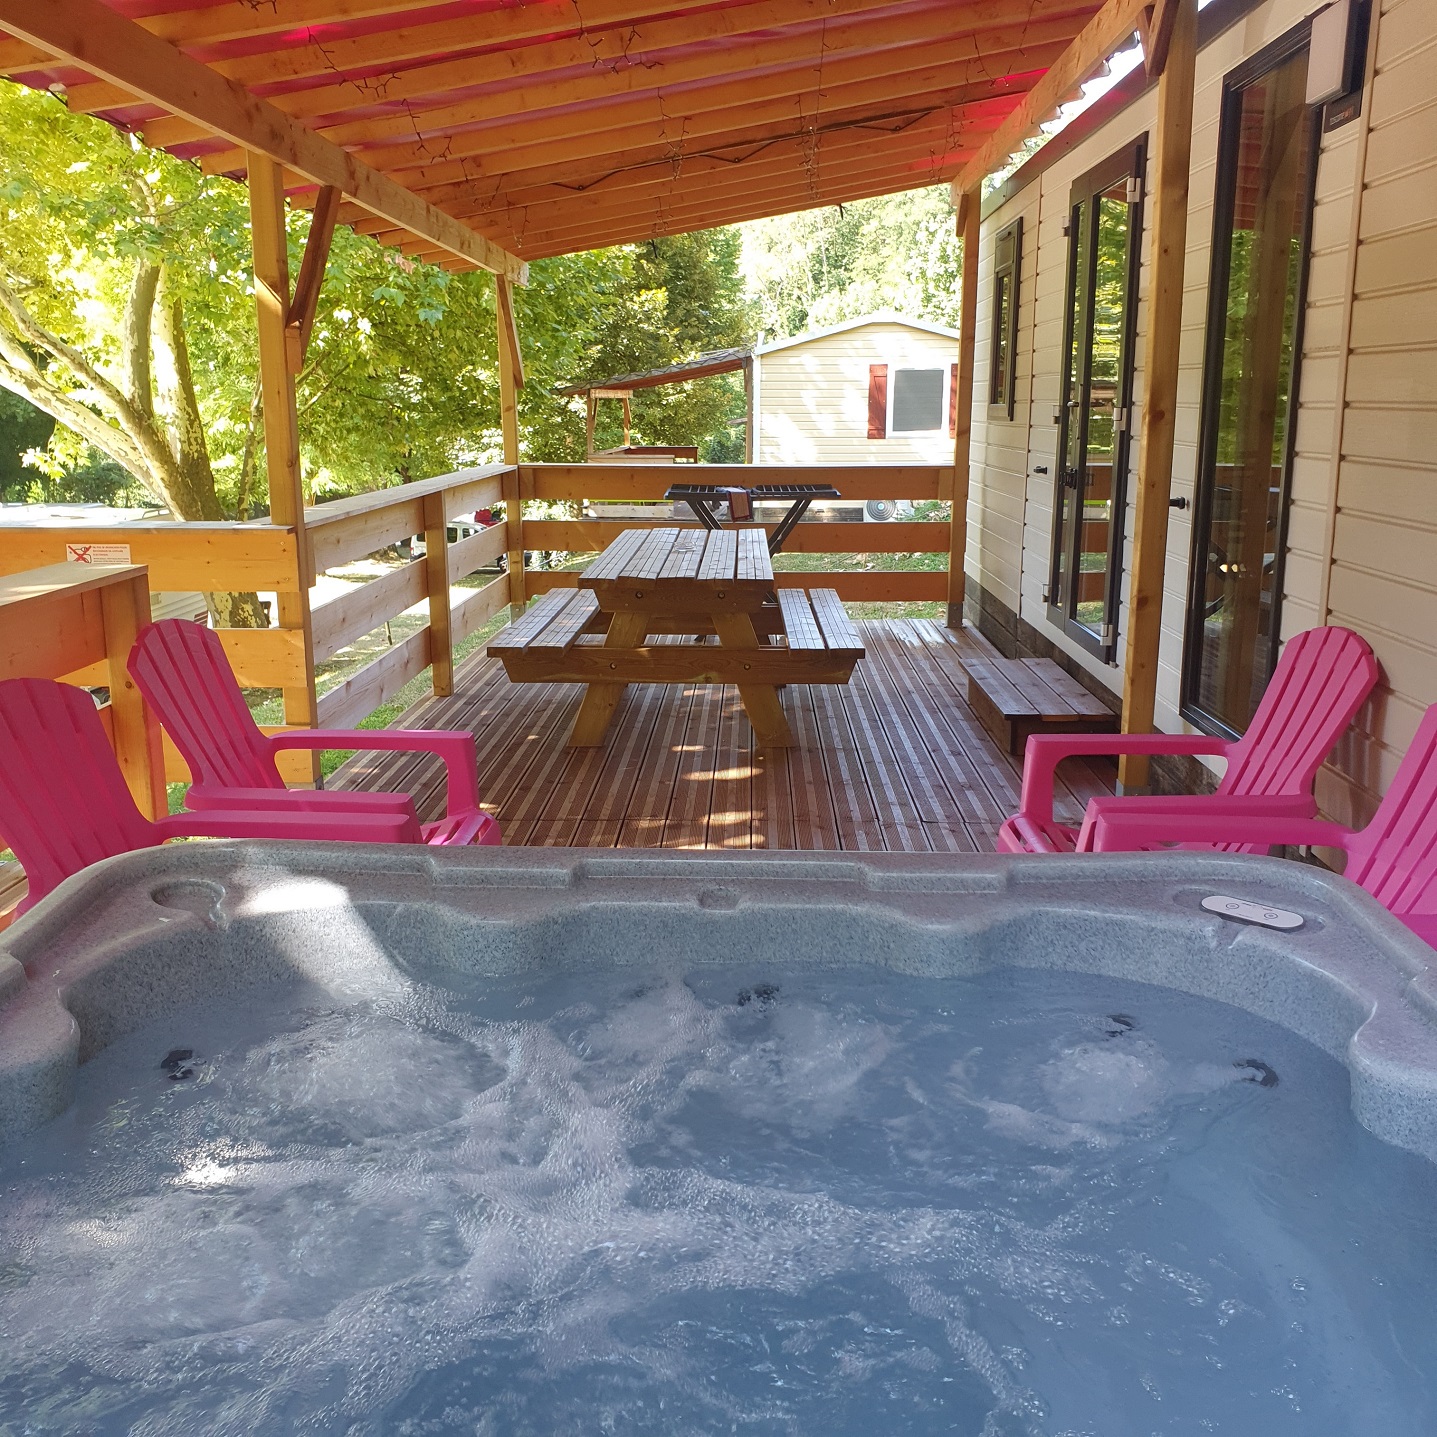 Accommodation - L'eden (3 Bedrooms, 40 M², Air-Conditioned , Spa) - Camping Le Bois de Cornage